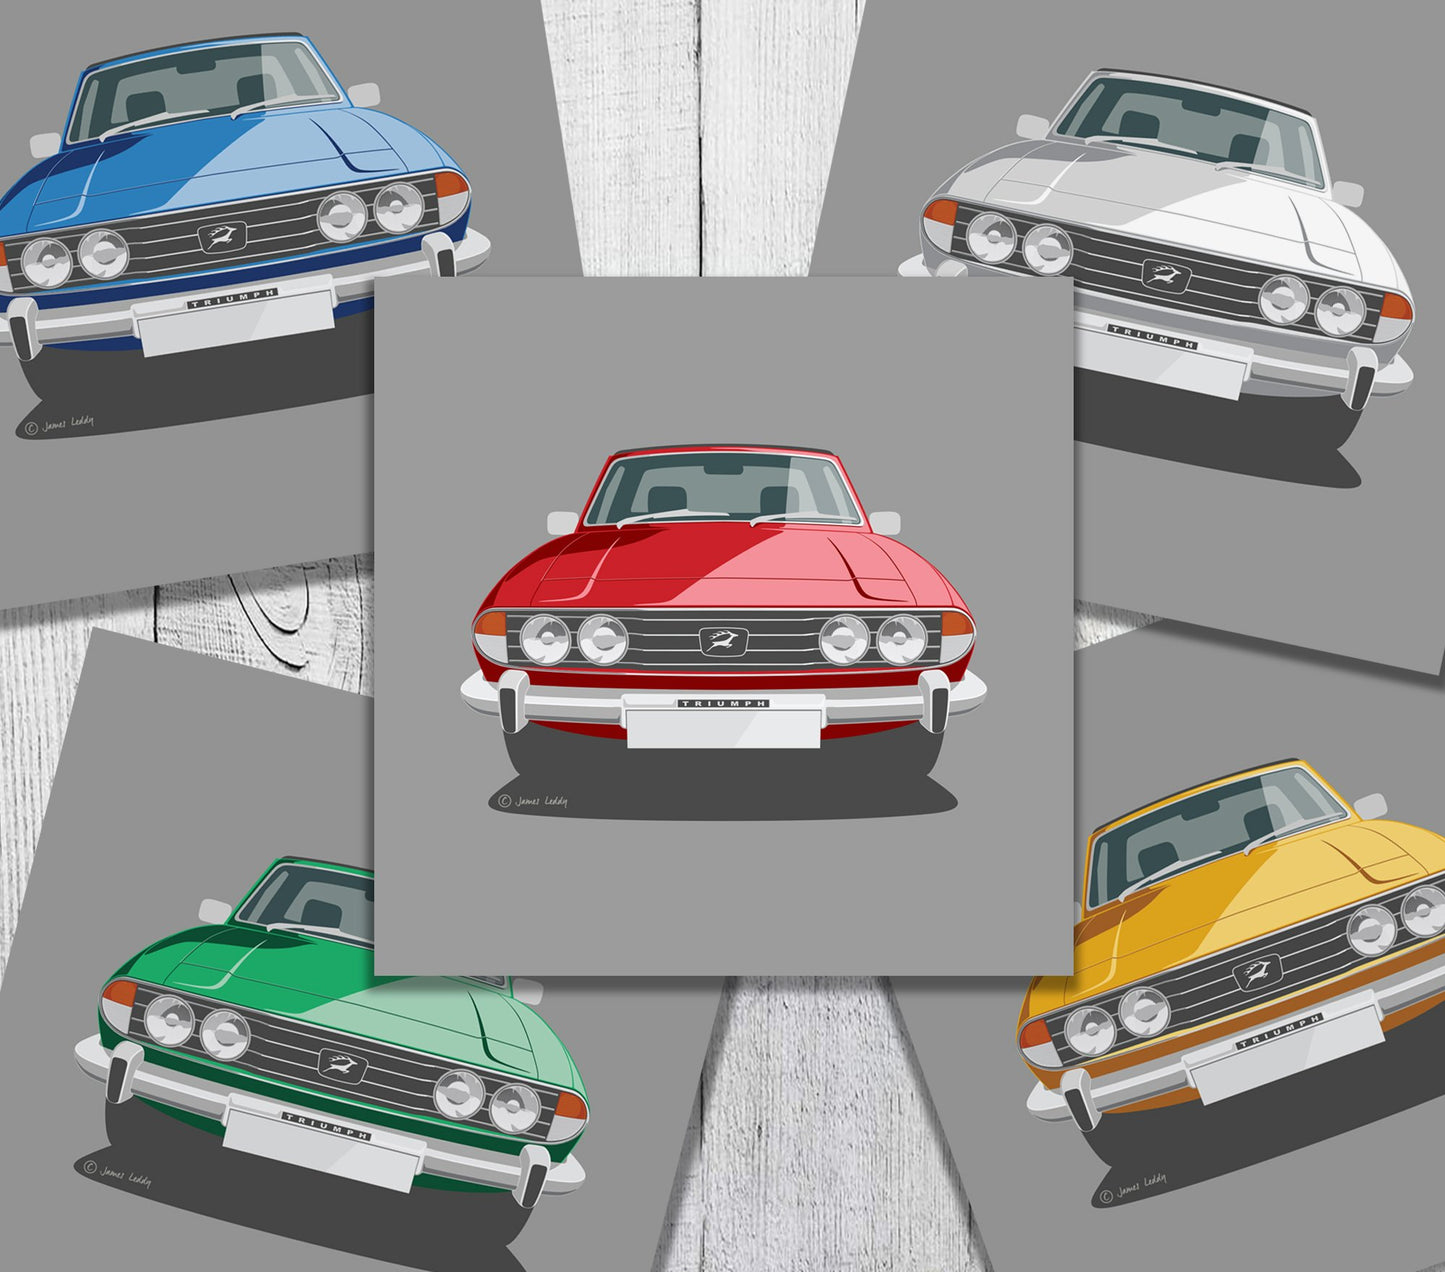 Triumph Stag Greeting Cards (single)